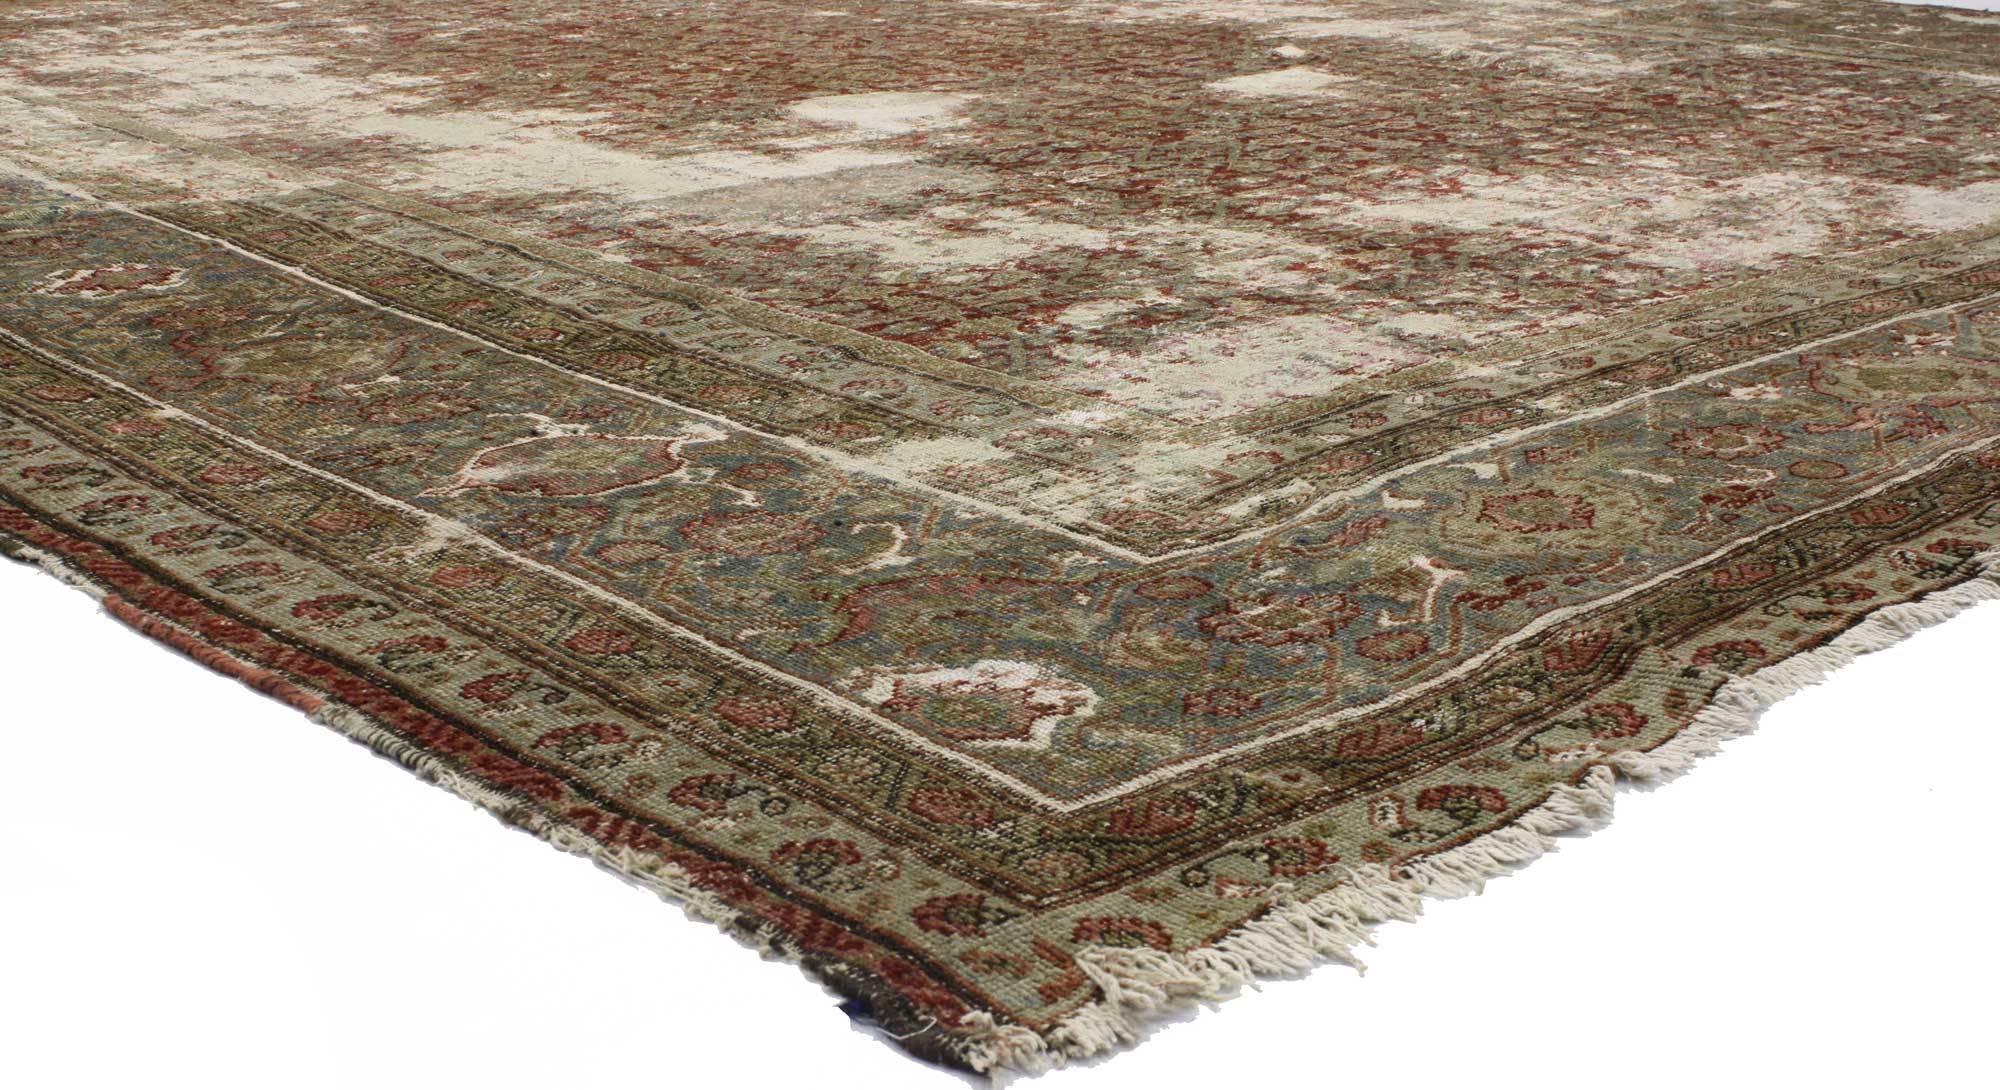 73485 Distressed Late 19th Century Antique Persian Sultanabad Rug with Rustic Mountain Adirondack Style 13'04 X 17'07. This hand-knotted wool distressed antique Persian Sultanabad in Rustic Mountain Adirondack style features an all-over geometric